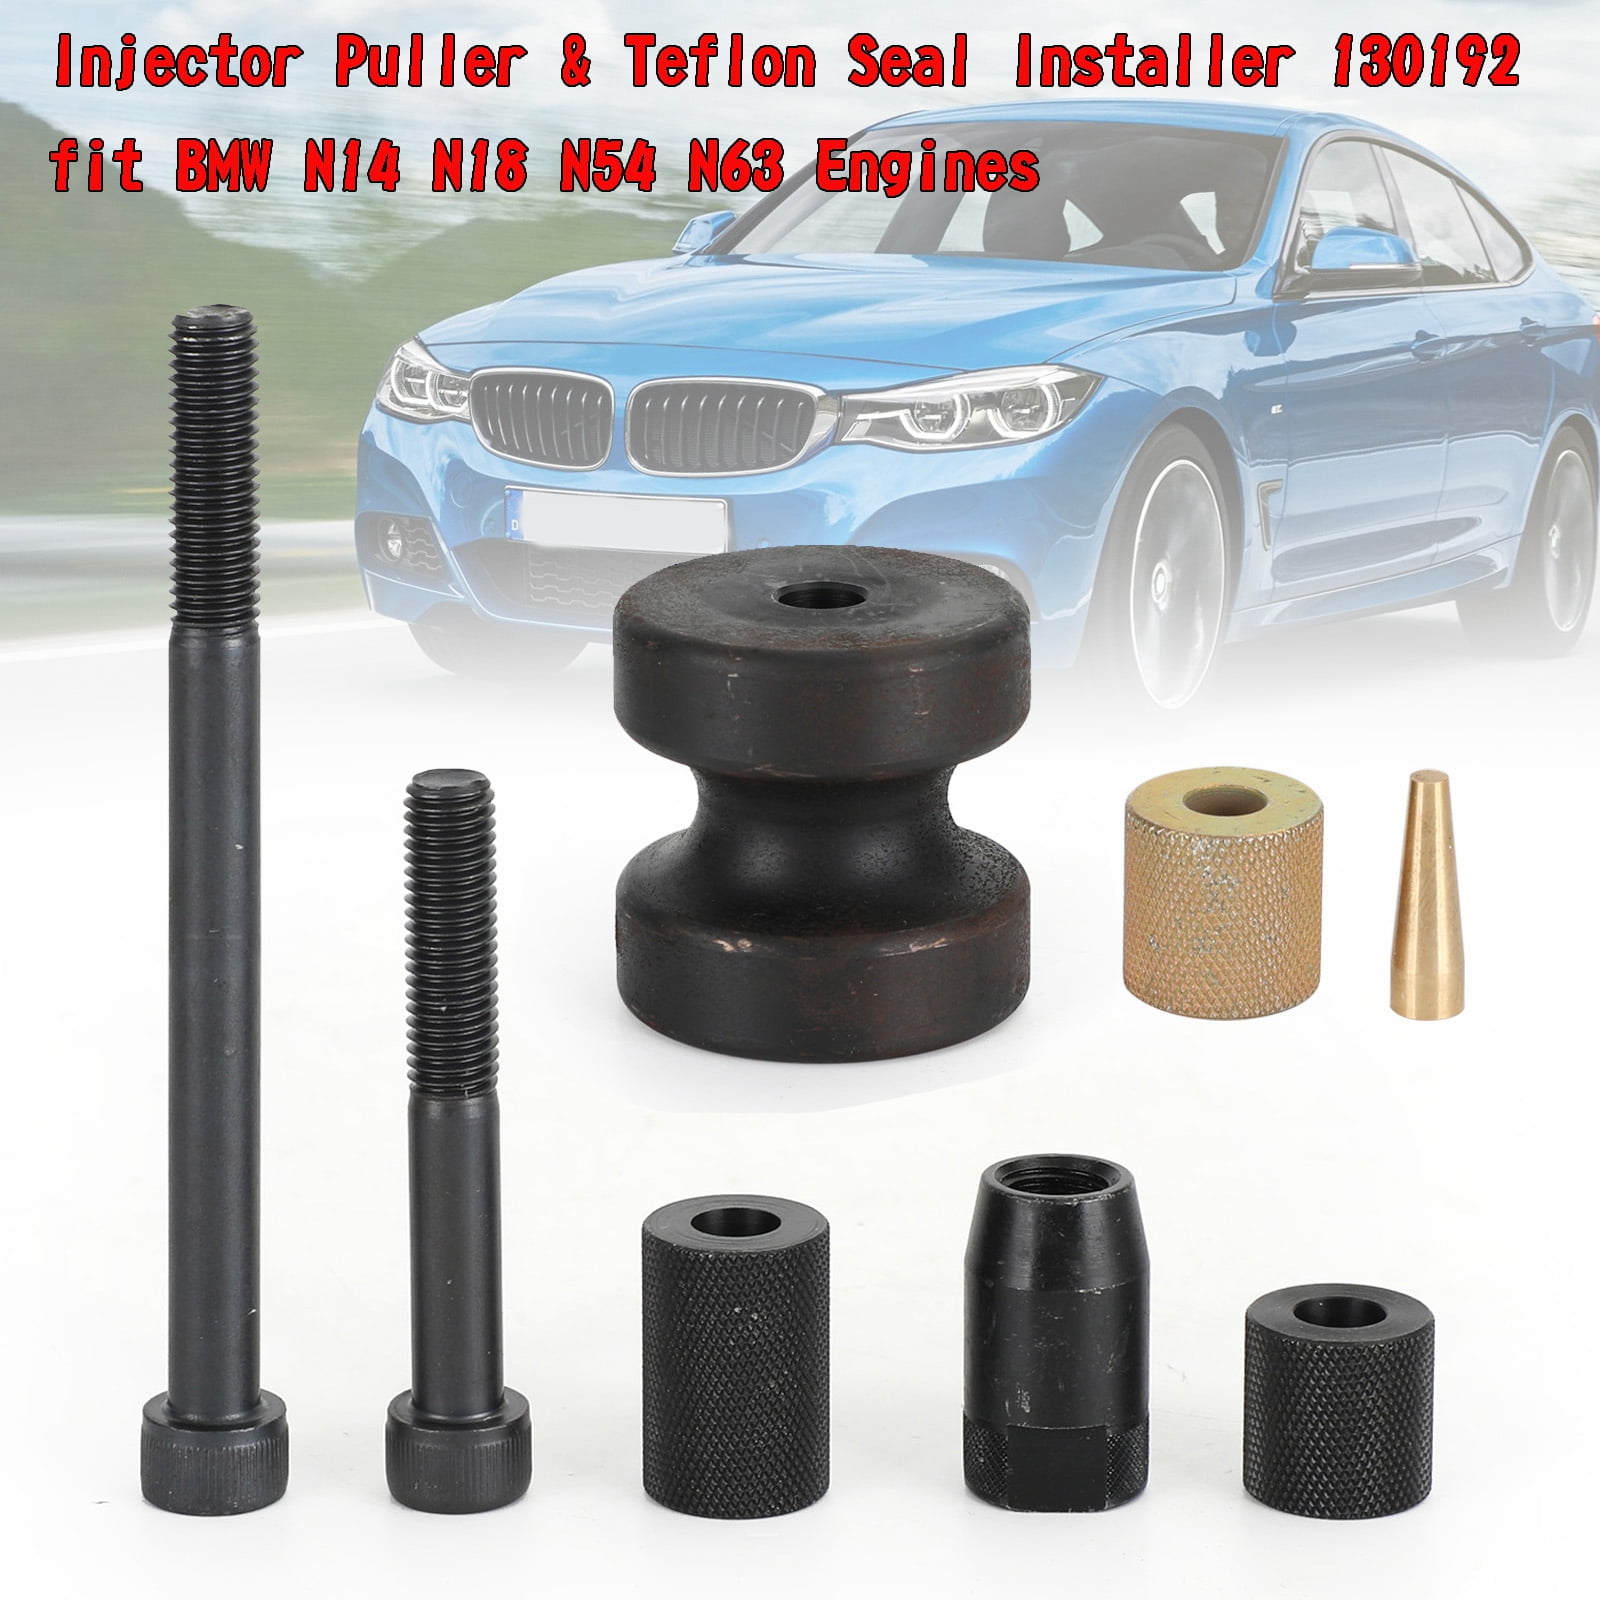 Bestu Injector Puller and Teflon Seal Installer Compatible with BMW 